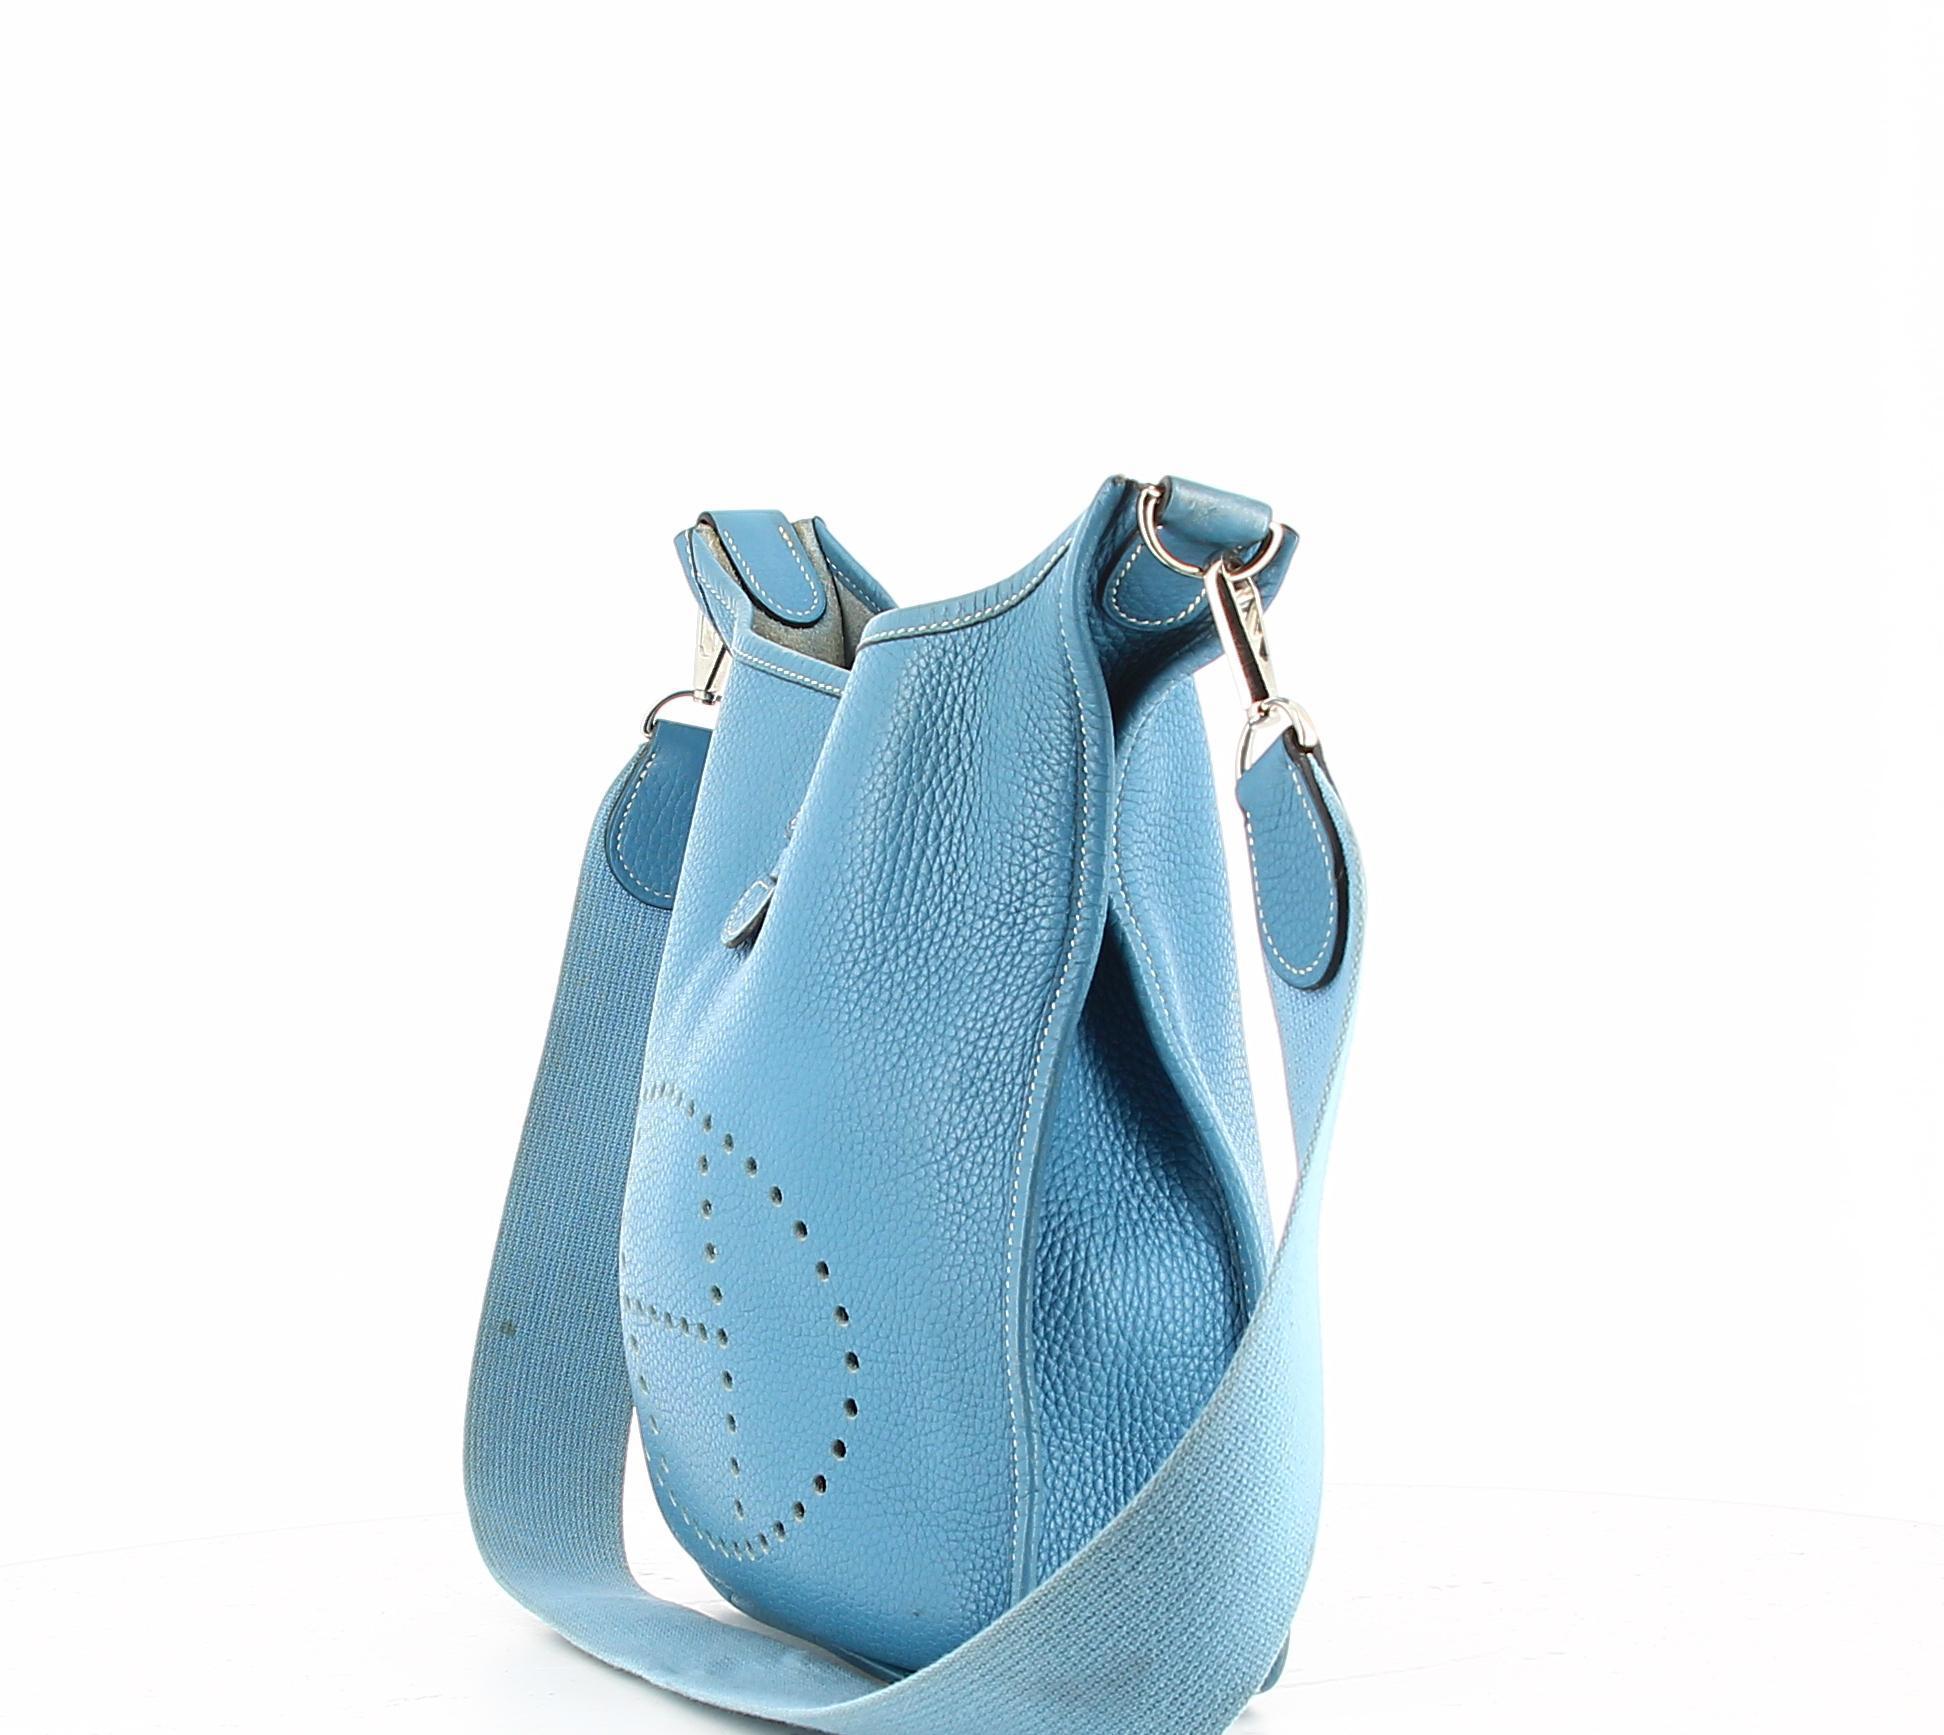 Hermès Evelyne blue leather bag
Perfored Evelyne blue leather bag with a perfored Big H in the front. A long shoulder strap and a leather clasp.
Grained leather with silver tone metal hardware finishes.
Very good condition, show some light signs of